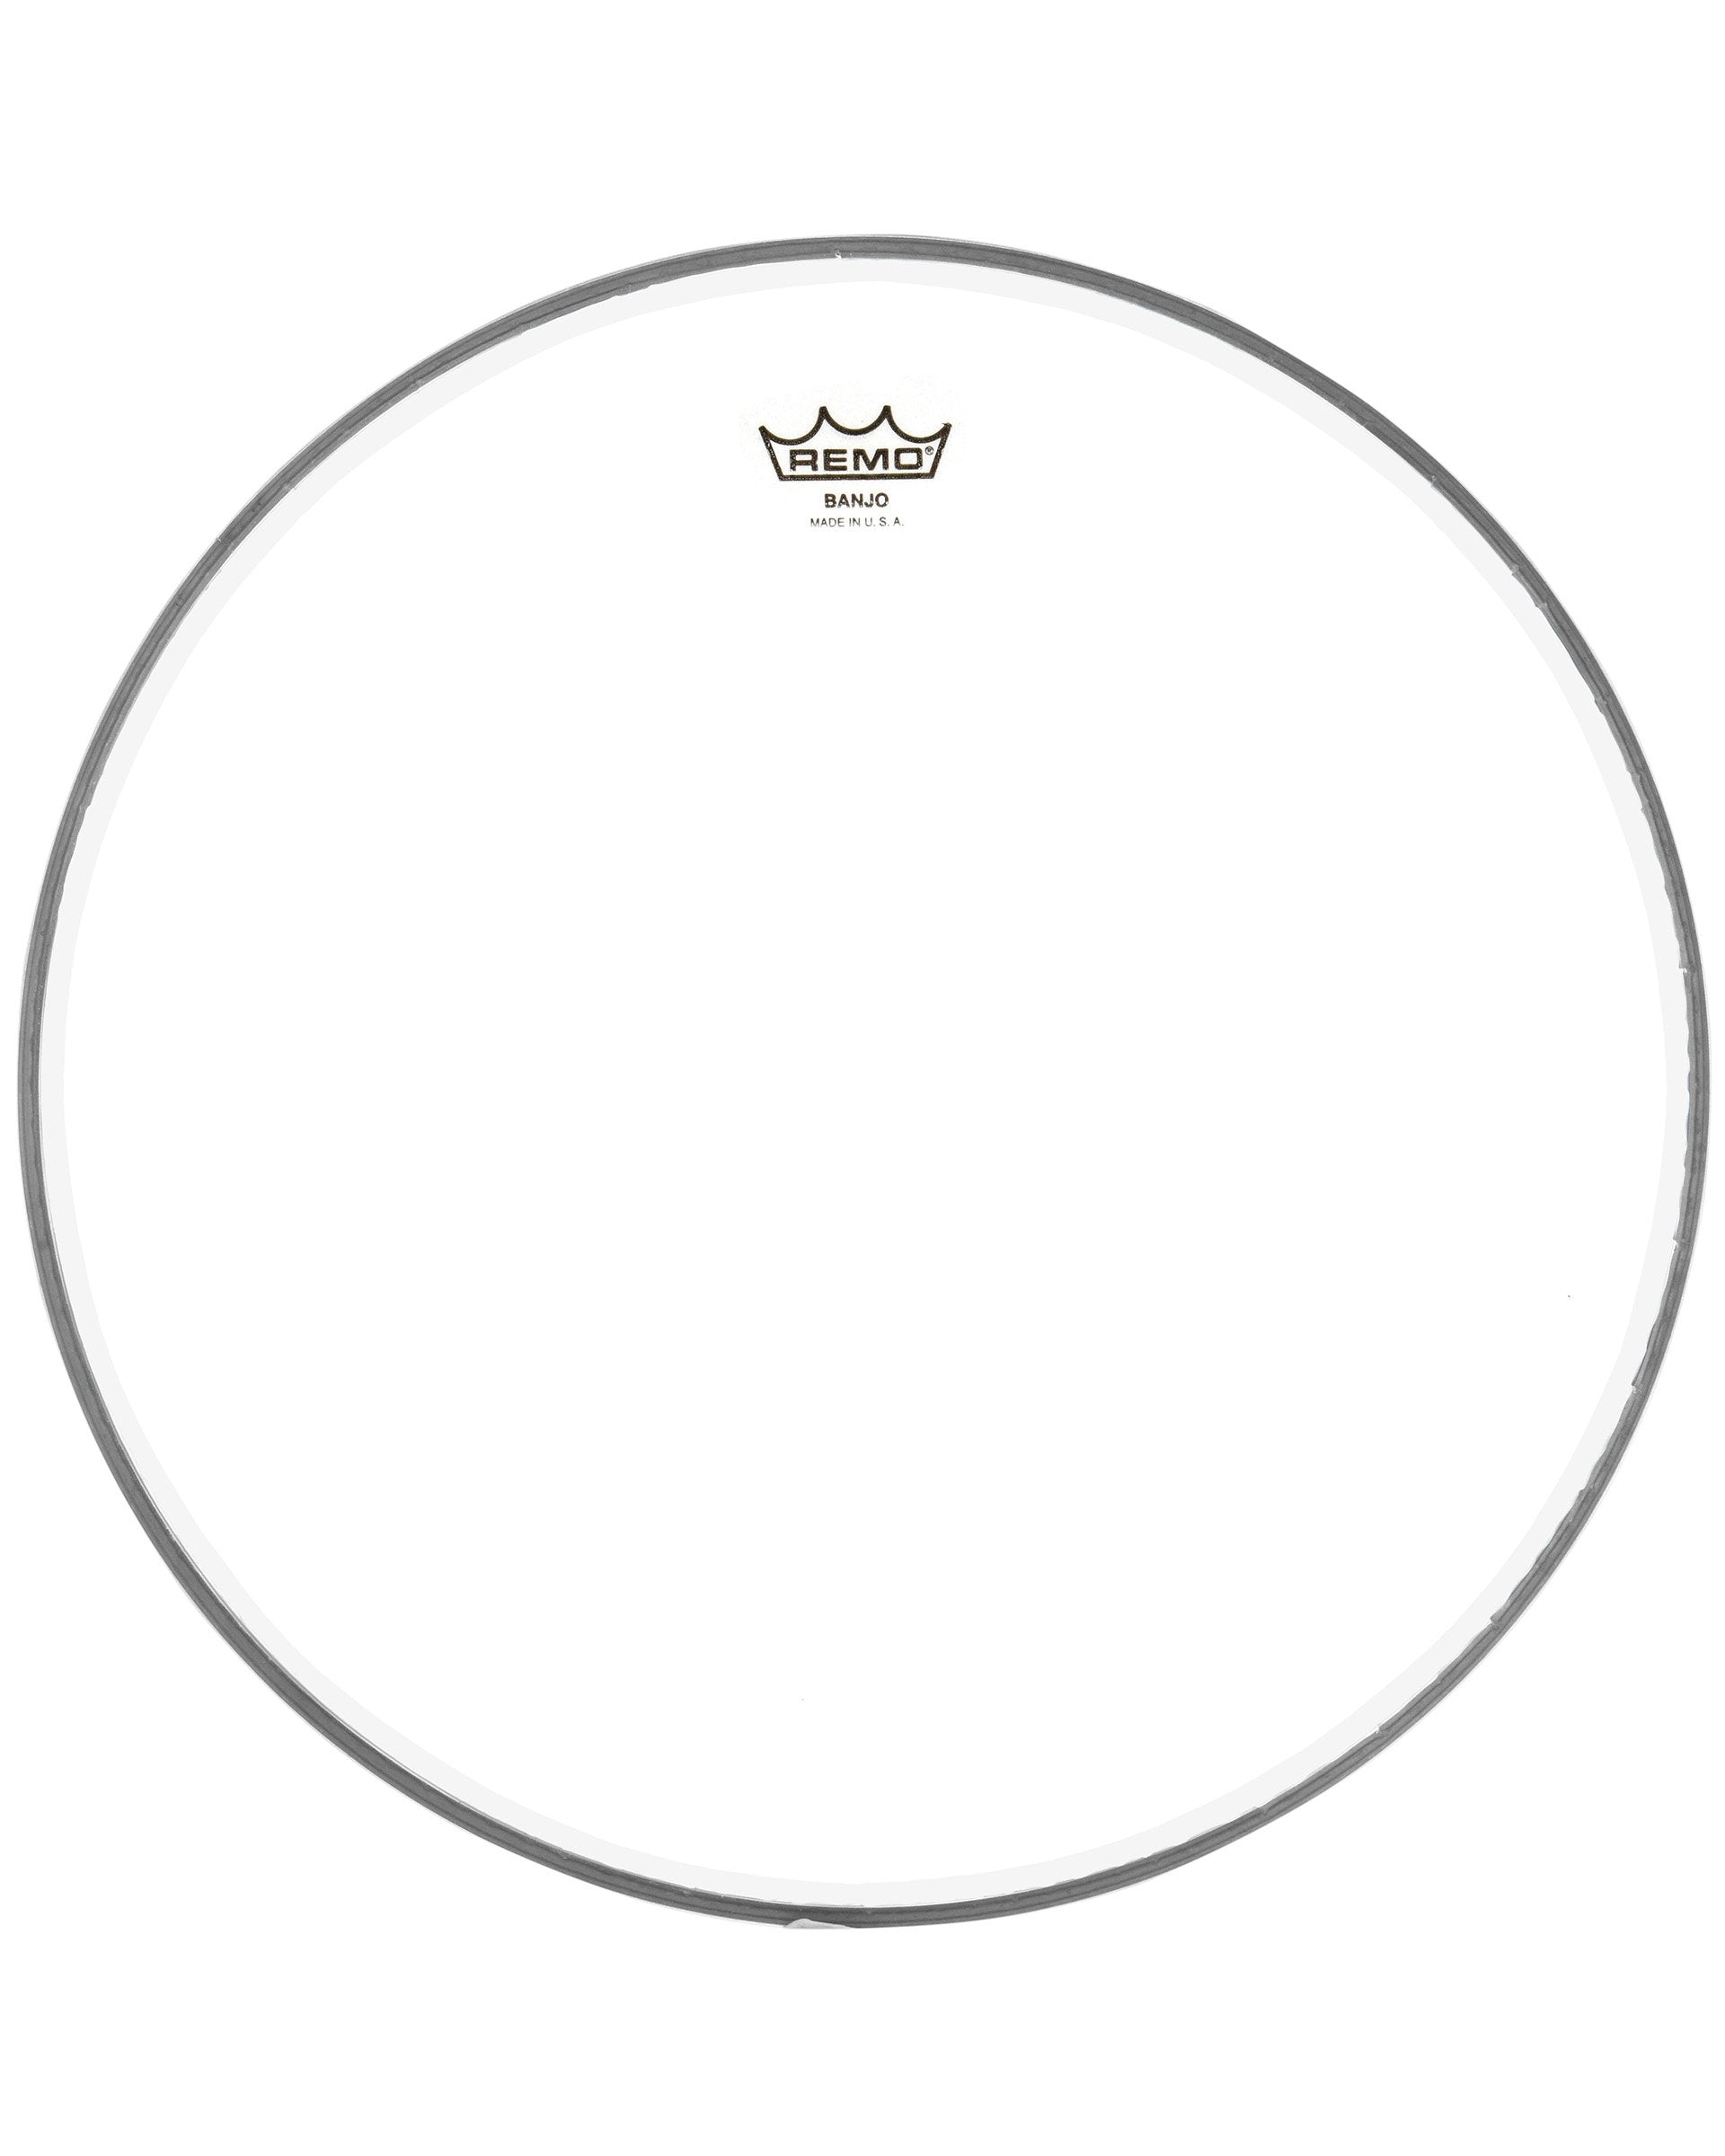 Image 1 of Remo Clear Banjo Head 10 7/8 Inch Diameter, High Crown (1/2 Inch) - SKU# B1014-H-CLR : Product Type Accessories & Parts : Elderly Instruments